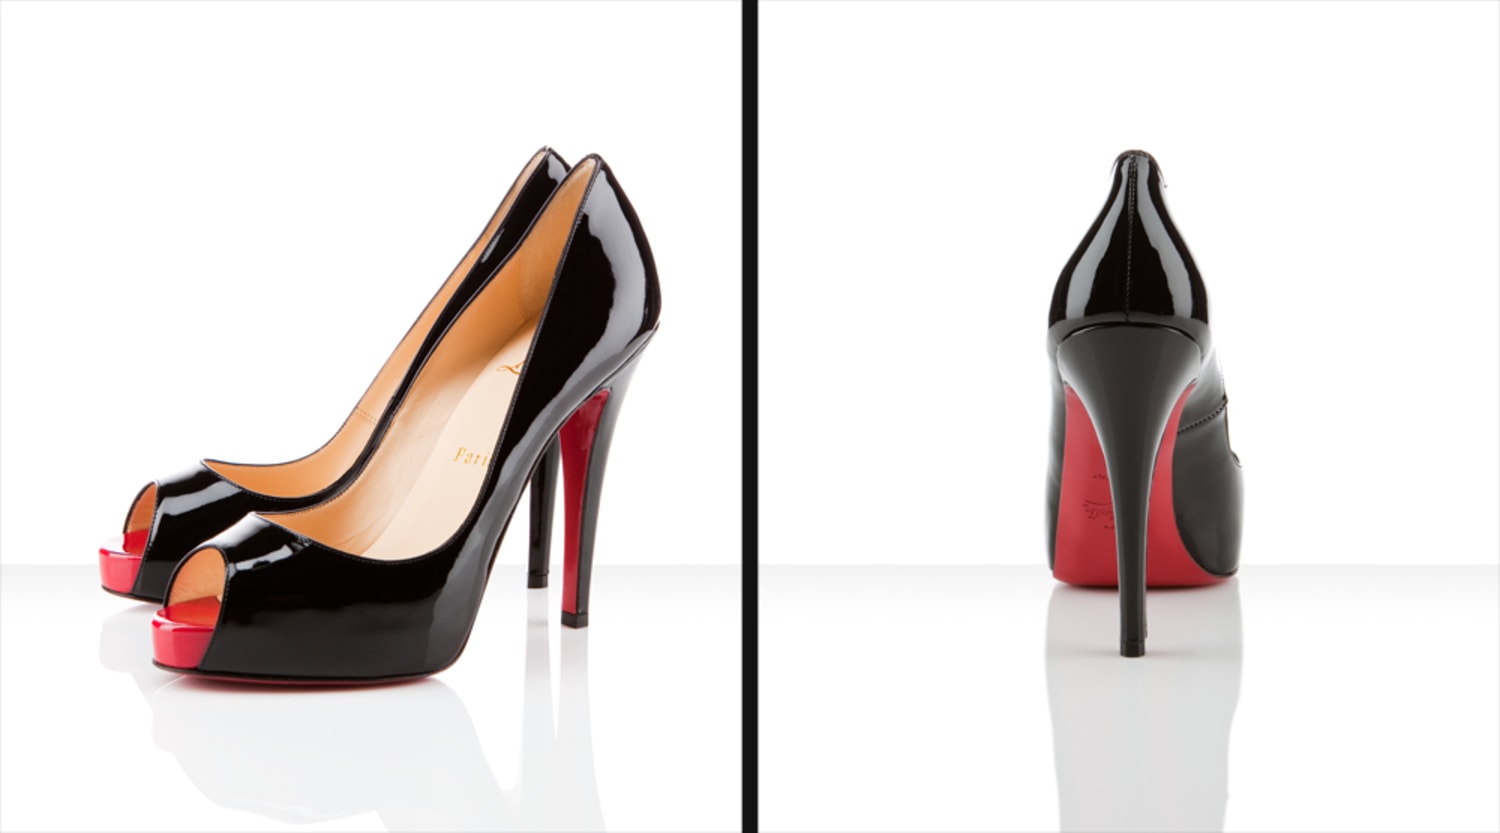 Red (sole) hot: Louboutin's super-high 8 heels